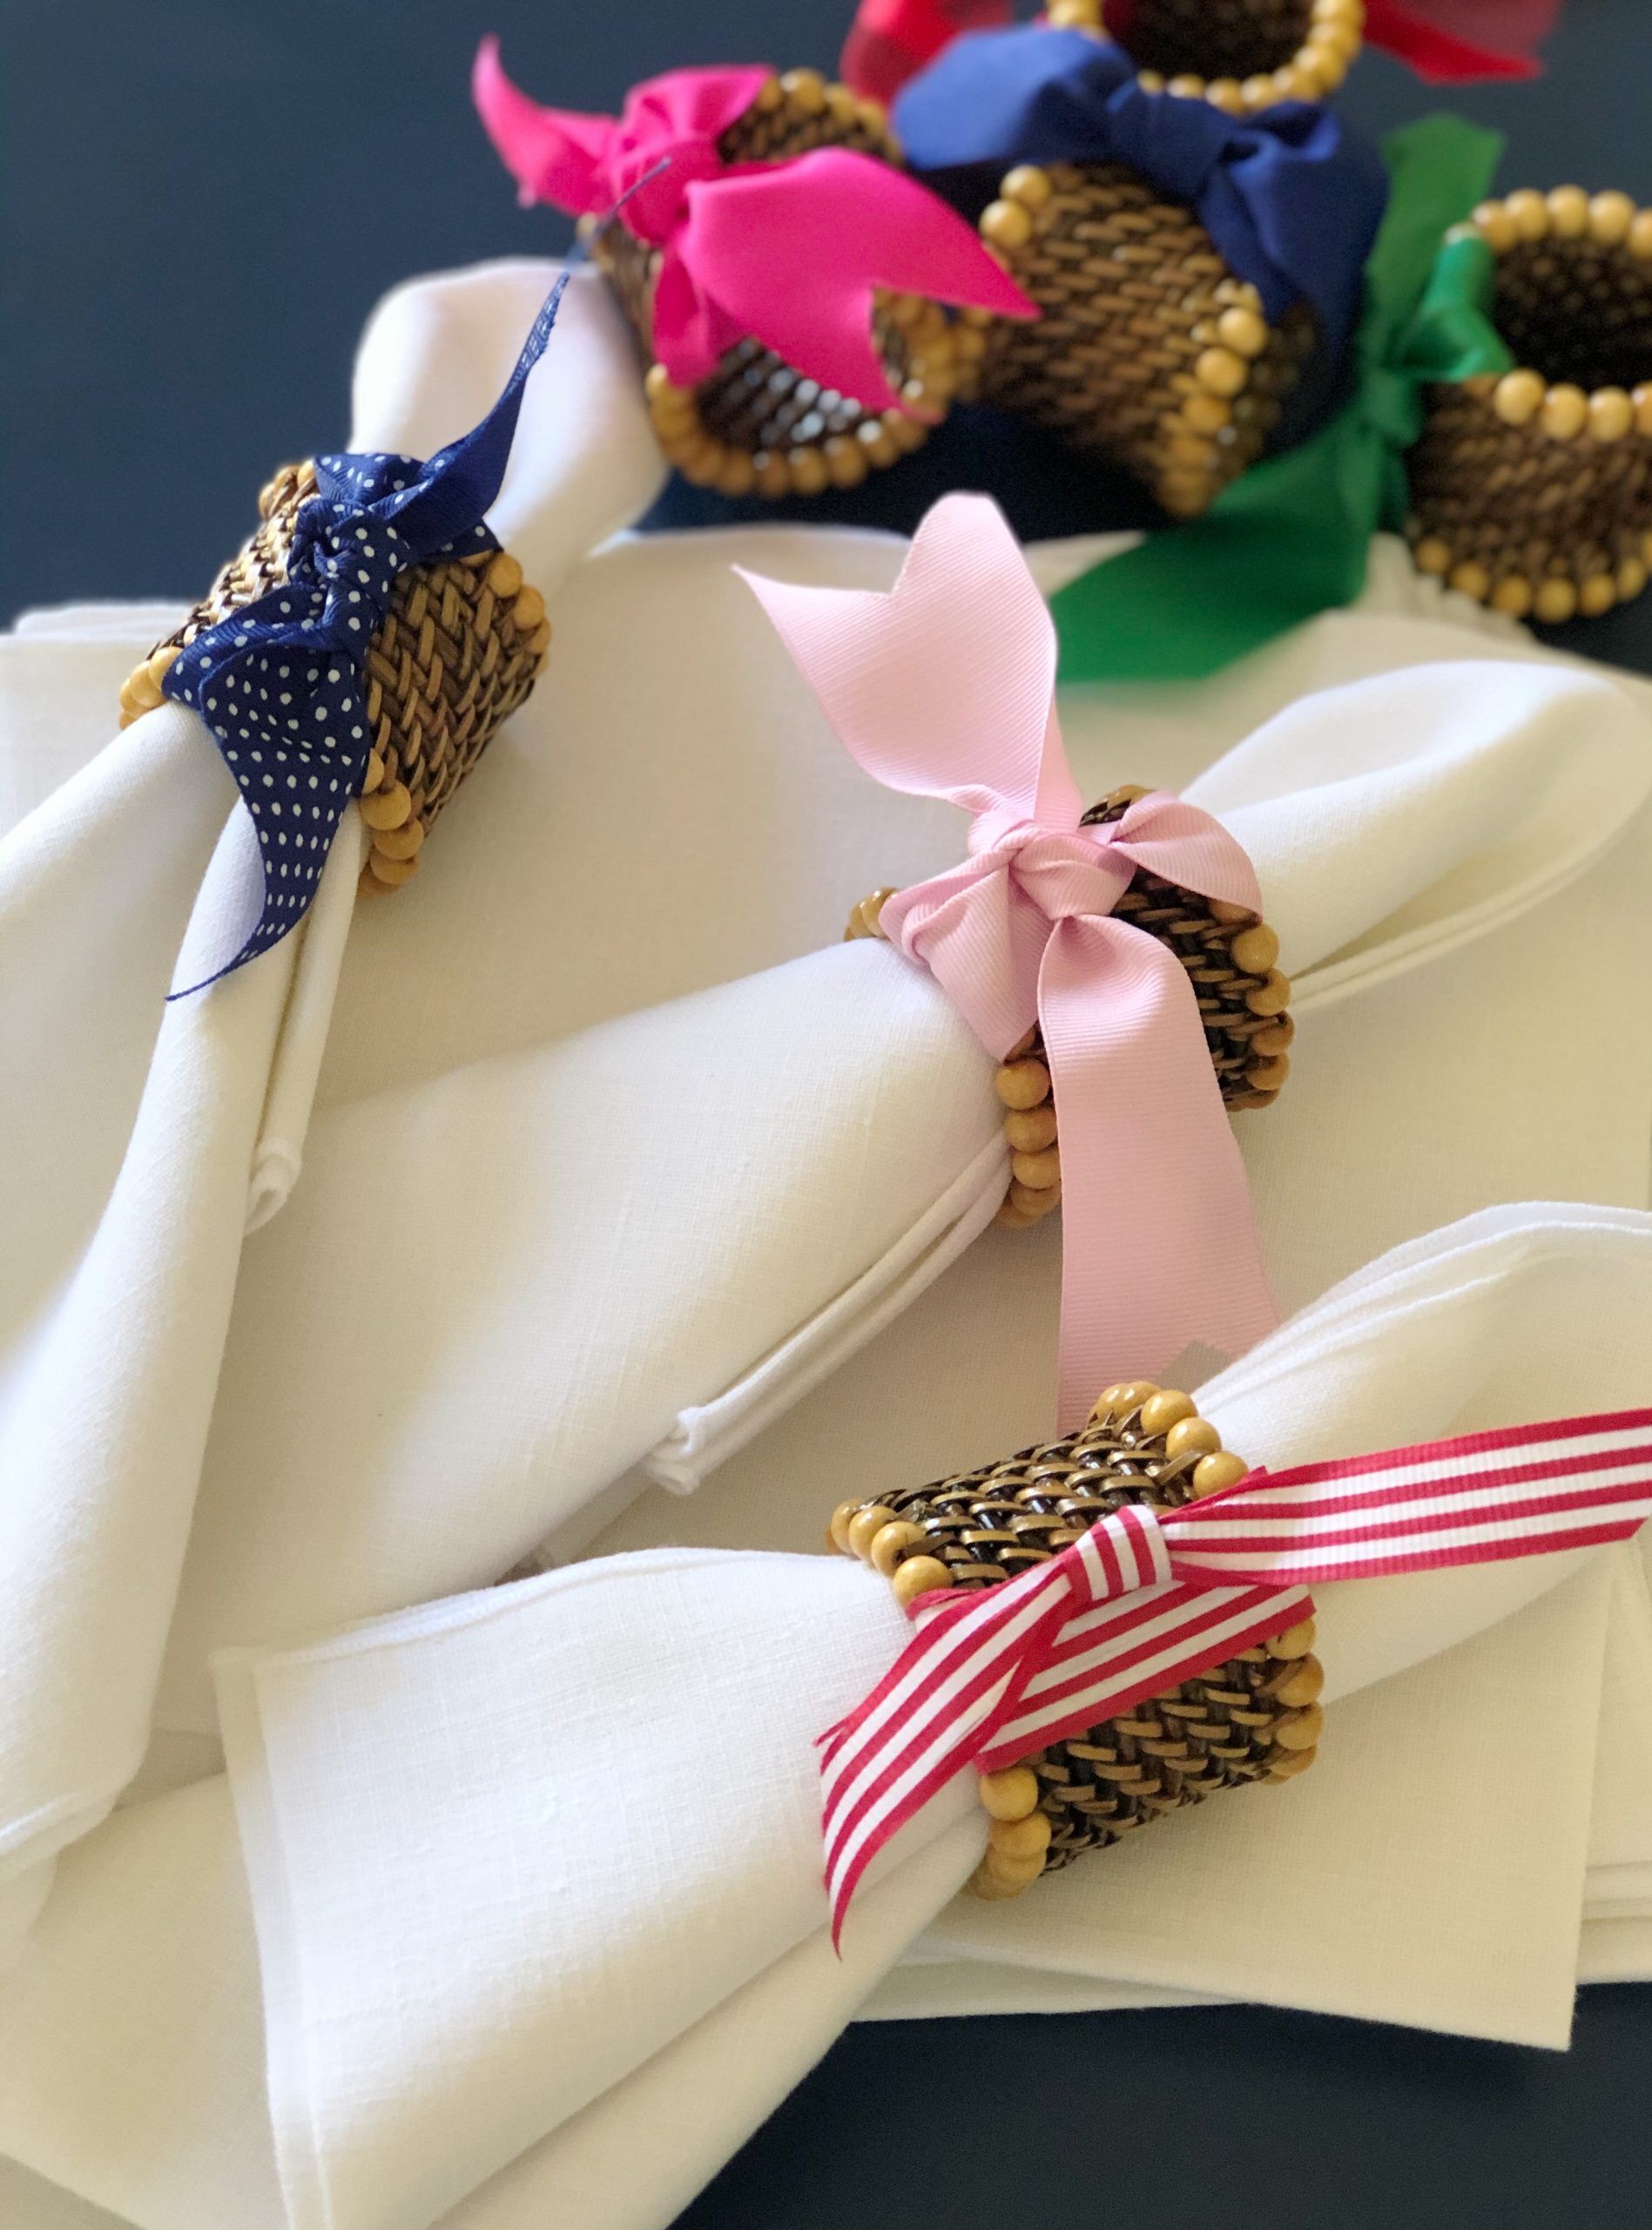 Save the wash! Tie different color ribbons onto your napkin rings and designate whose napkin is whose.